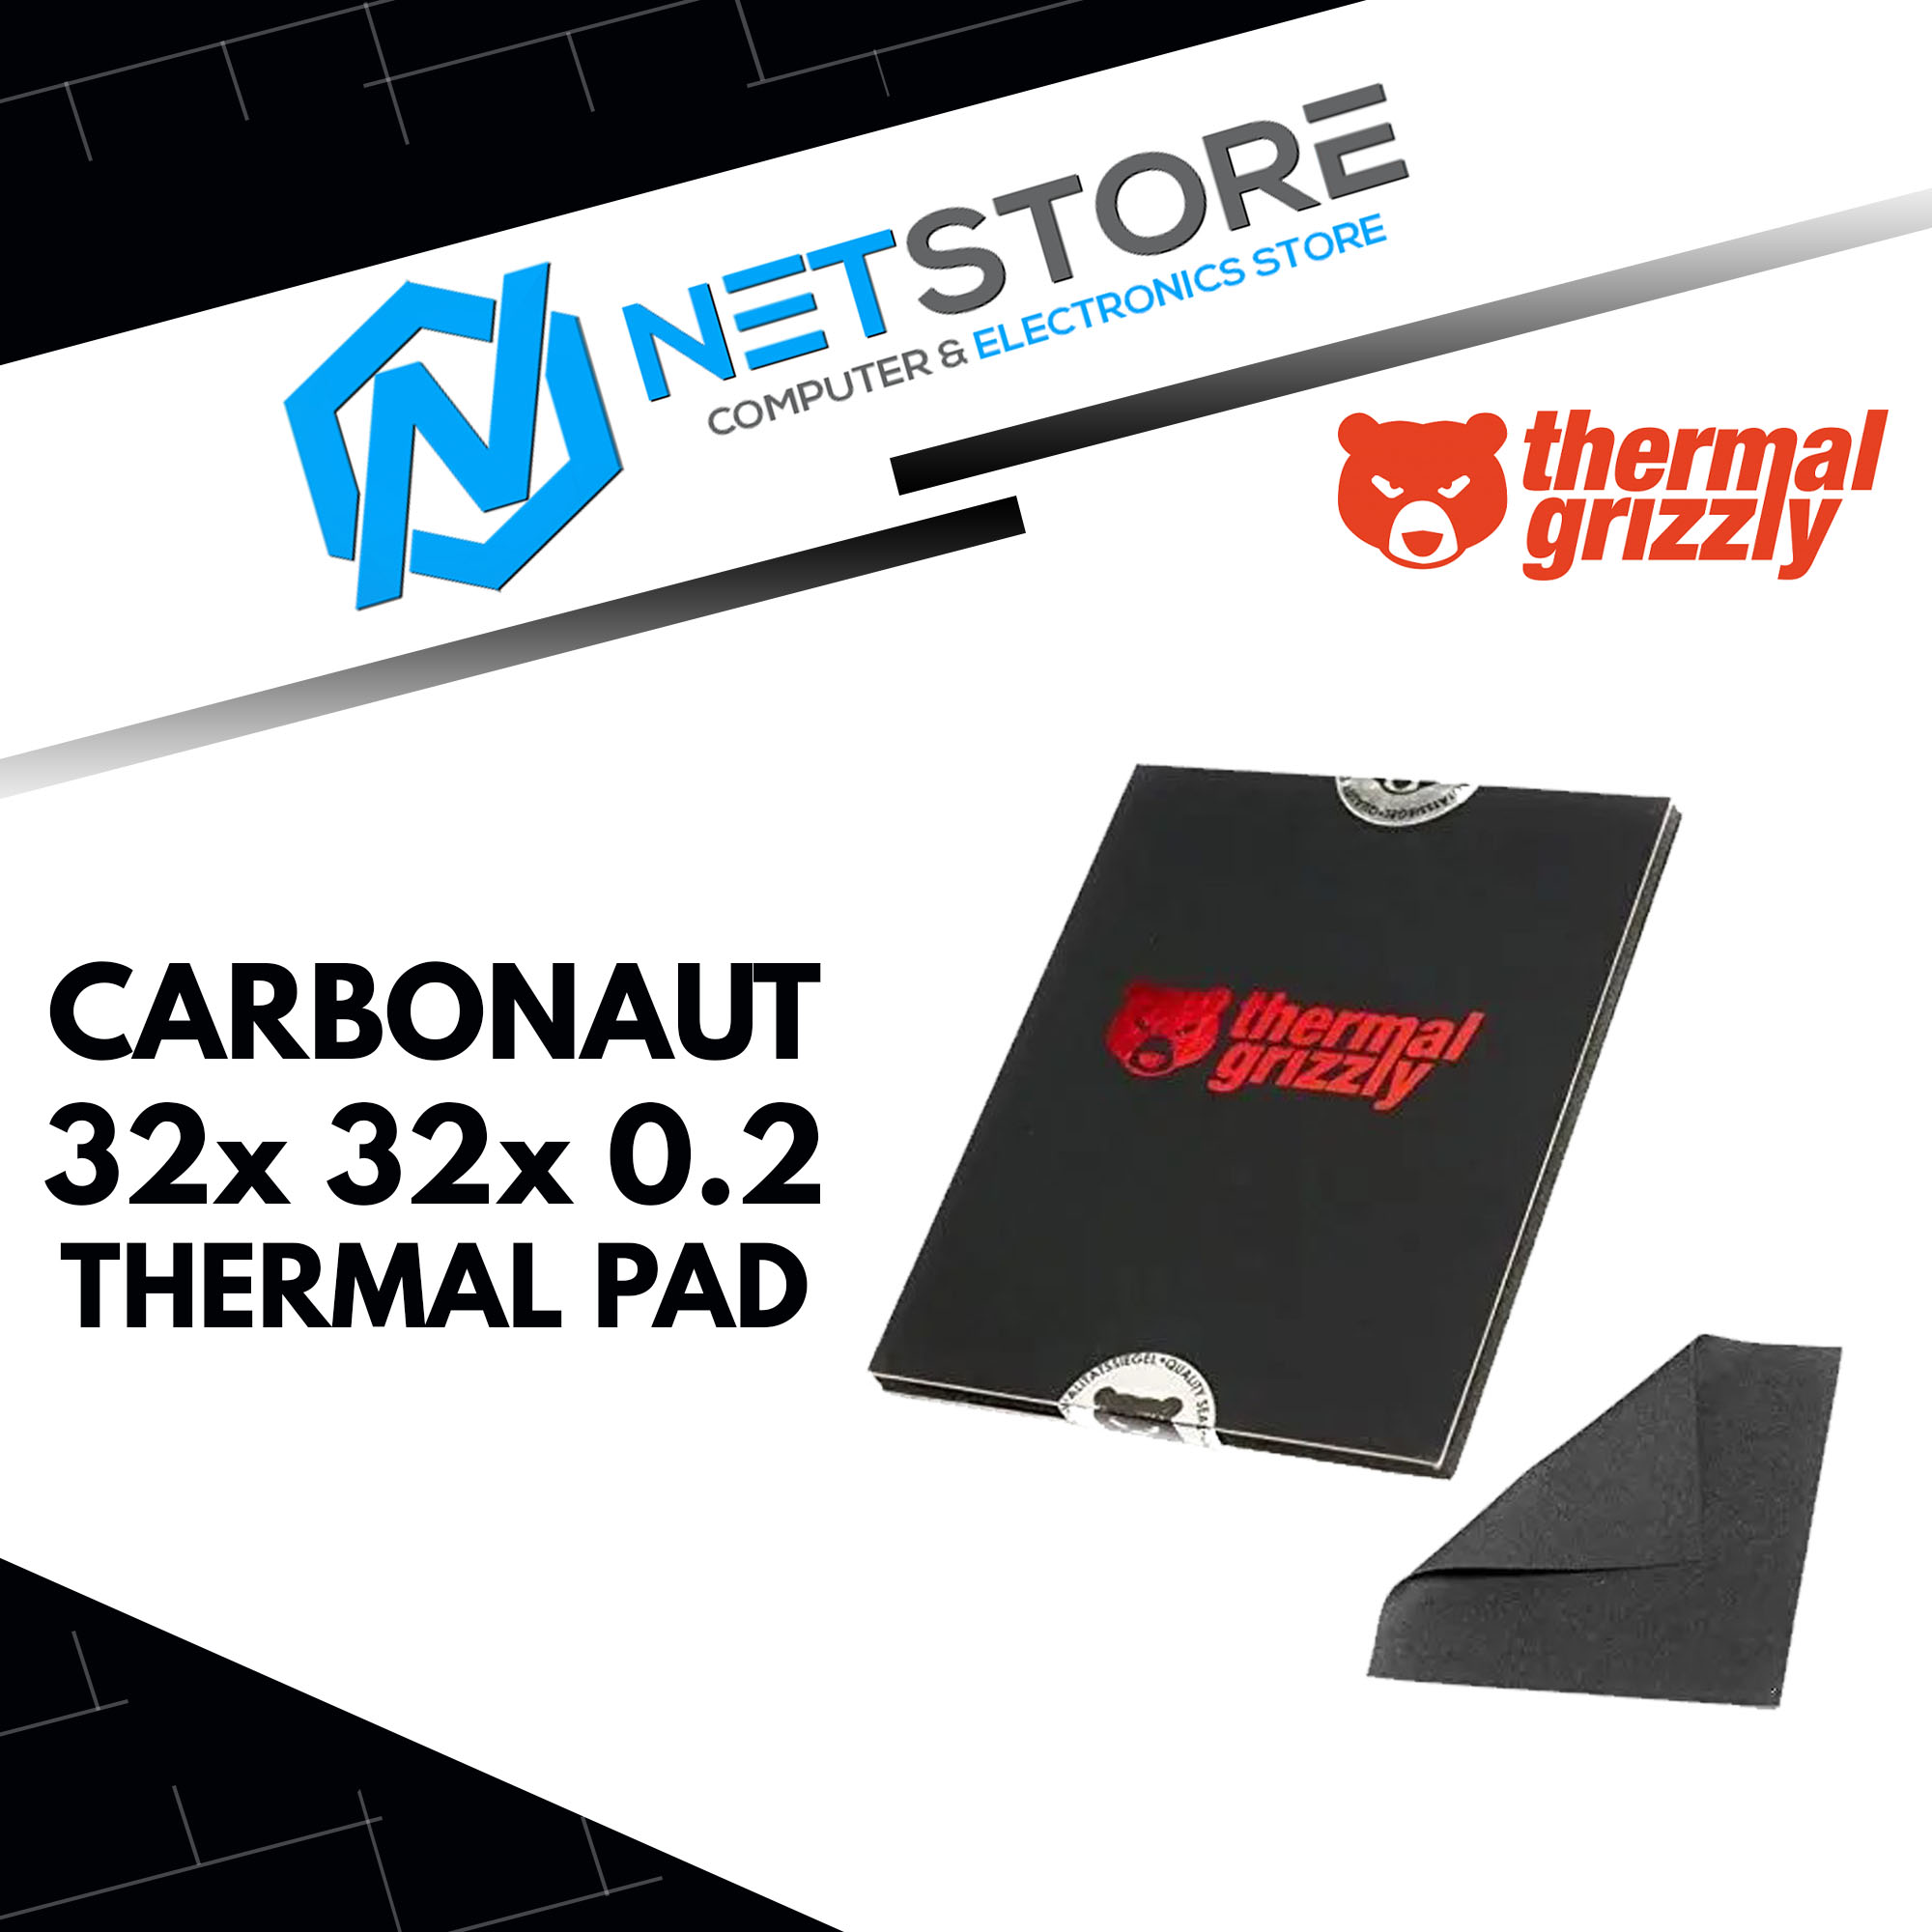 THERMAL GRIZZLY CARBONAUT 32x 32x 0.2 THERMAL PAD - TG-CA-32-32-02-R